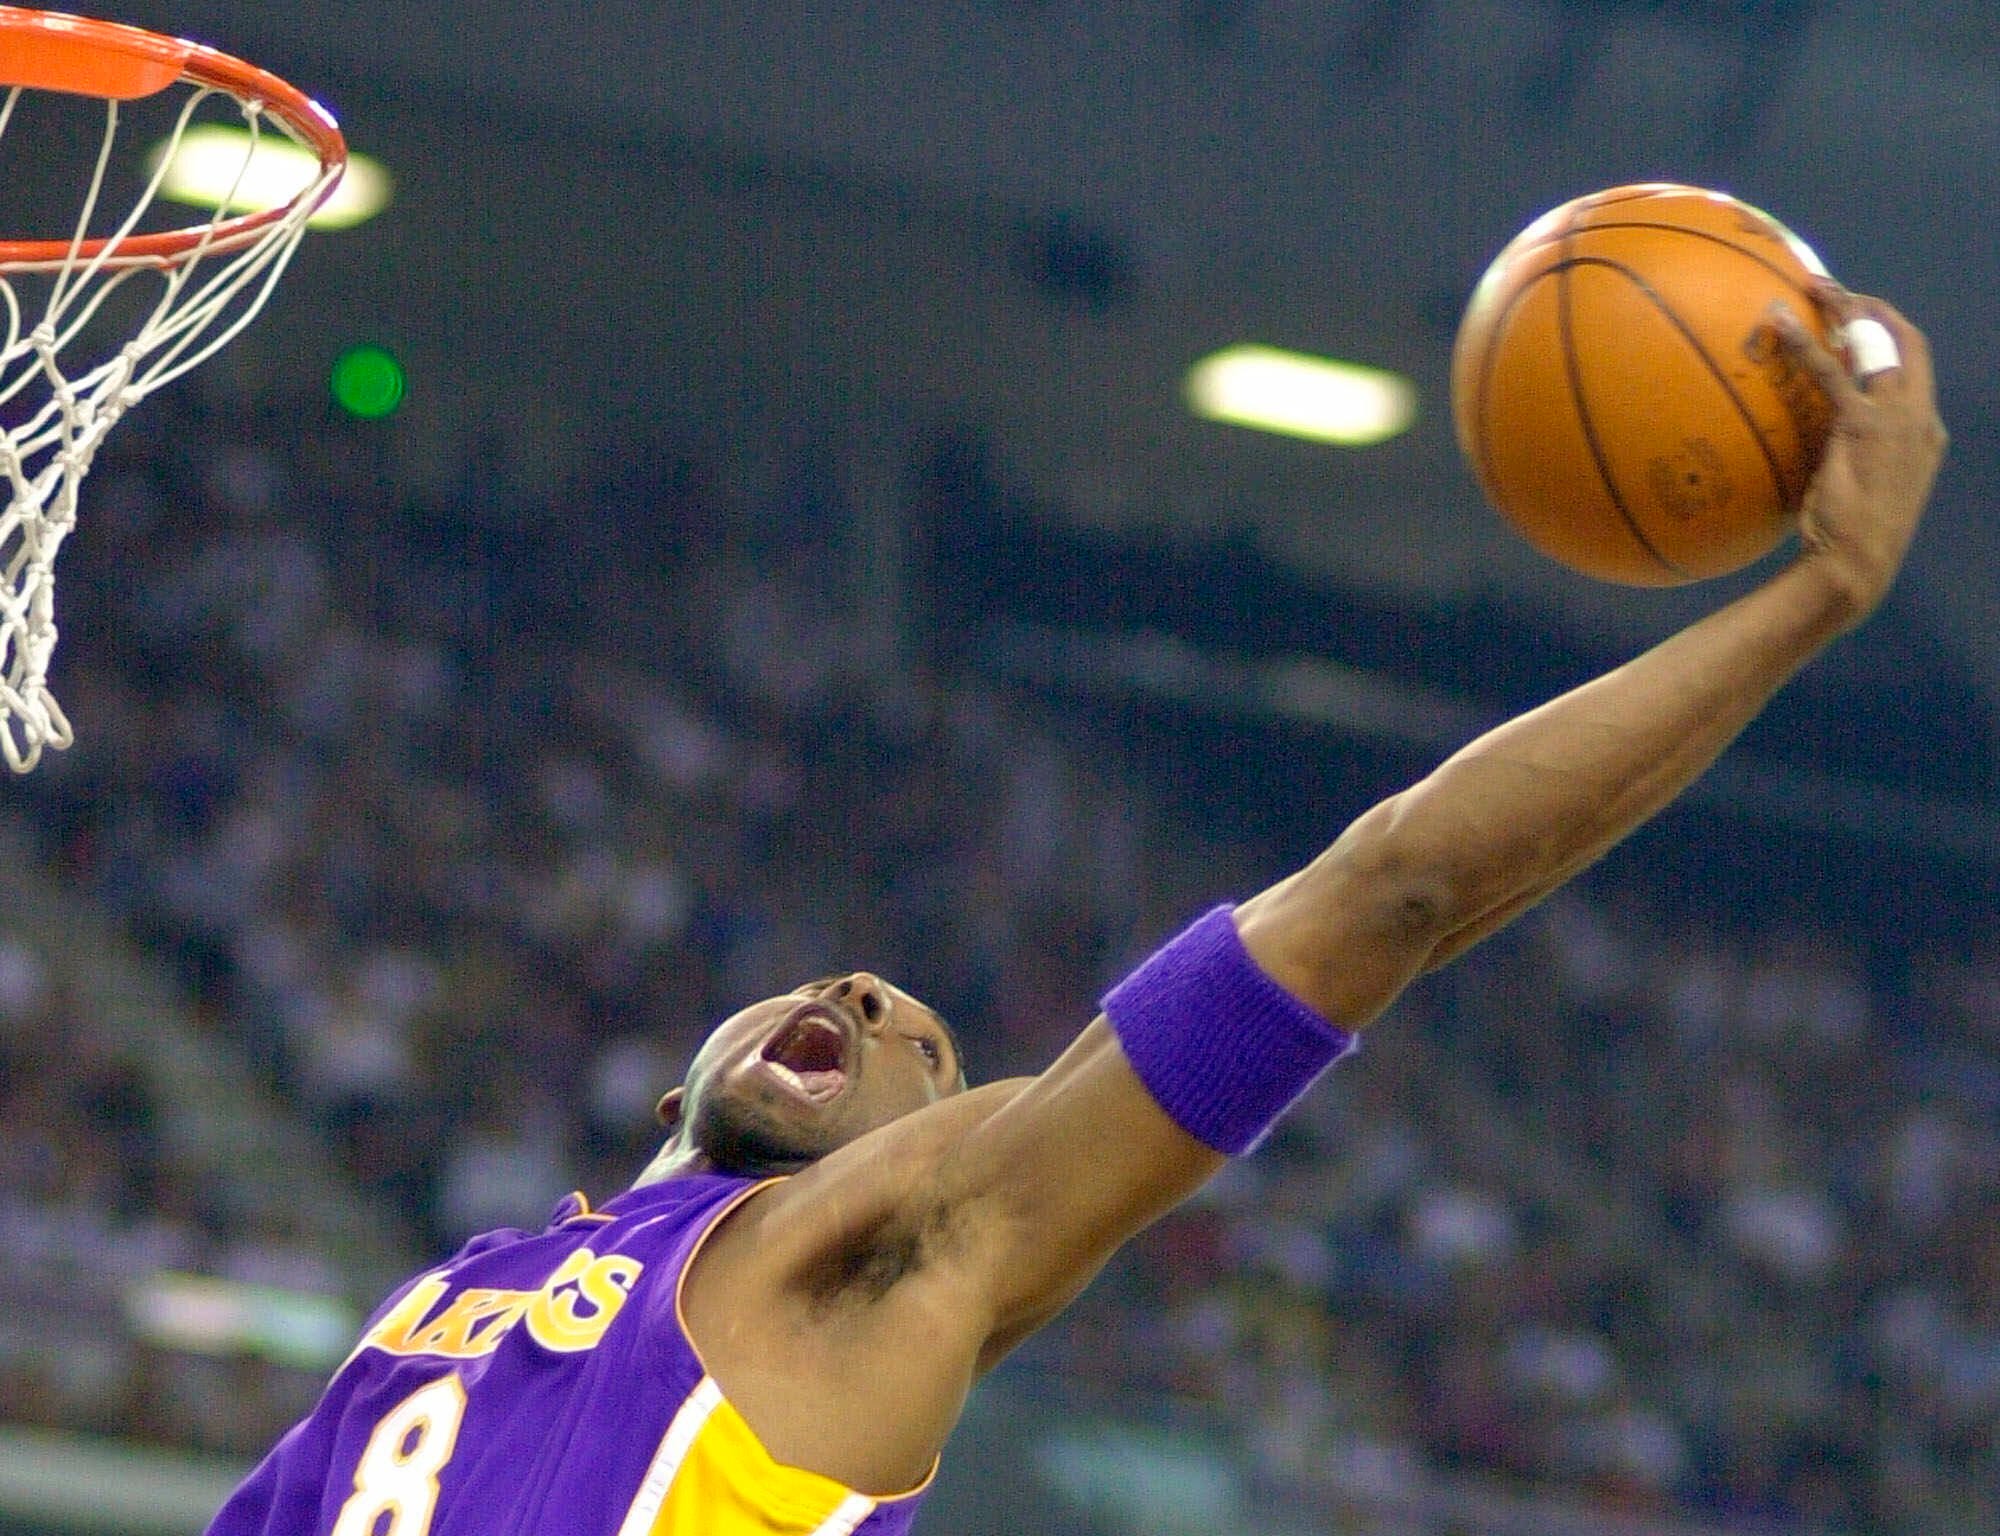 Kobe Bryant reaches back for a rebound in 2001.